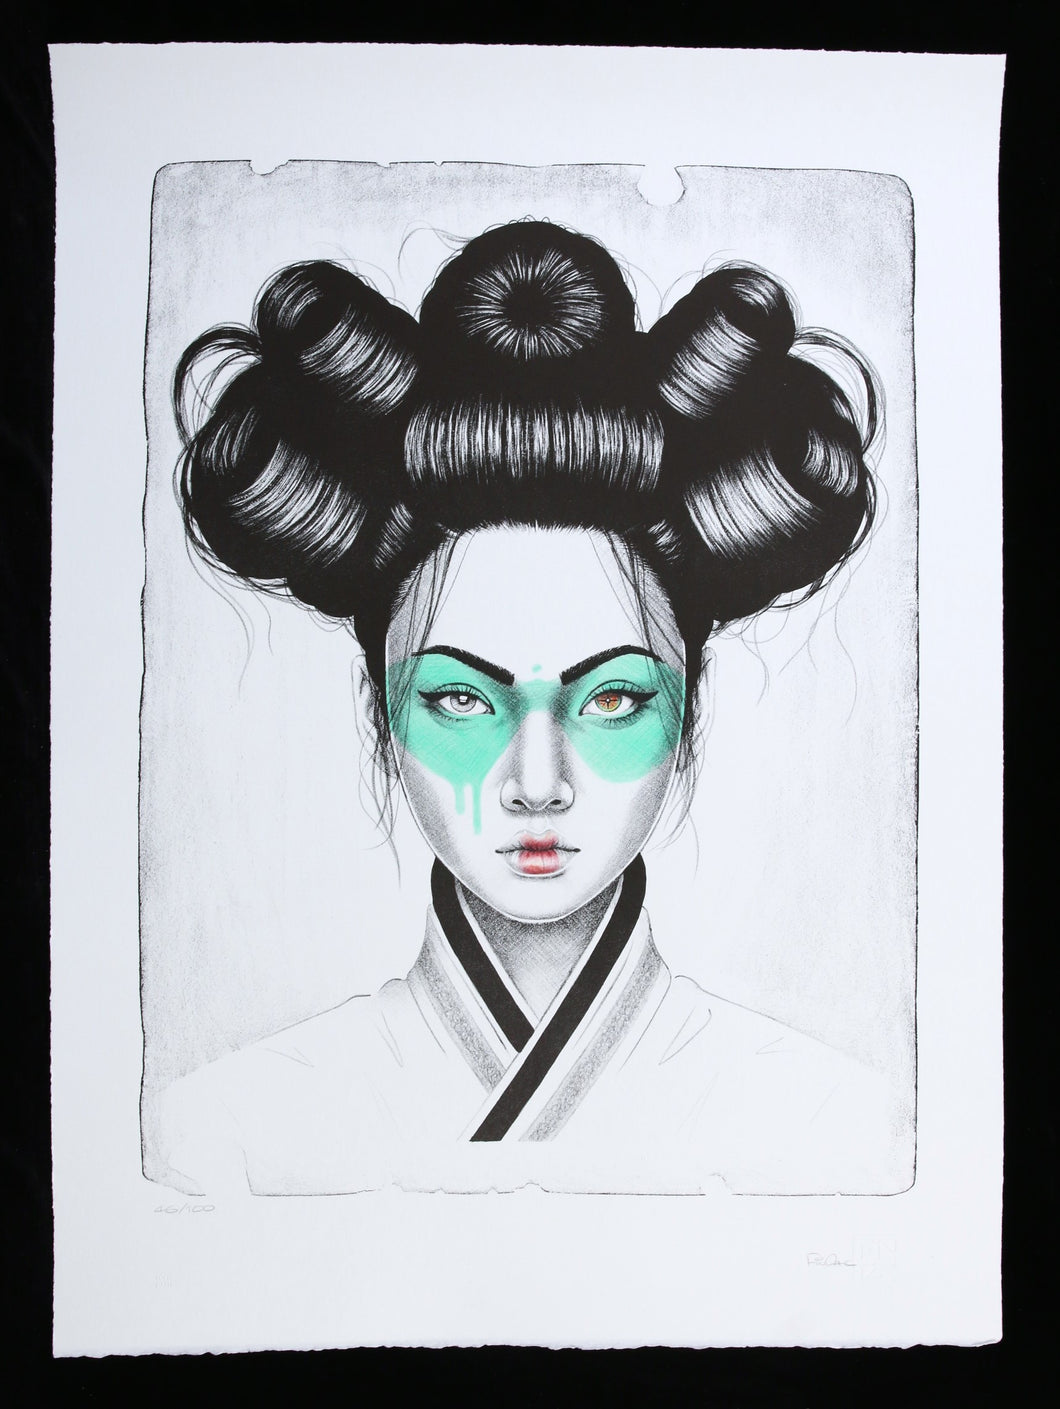 FINDAC C4 Cybrid Turquoise- Handfinished Stone Lithograph signed